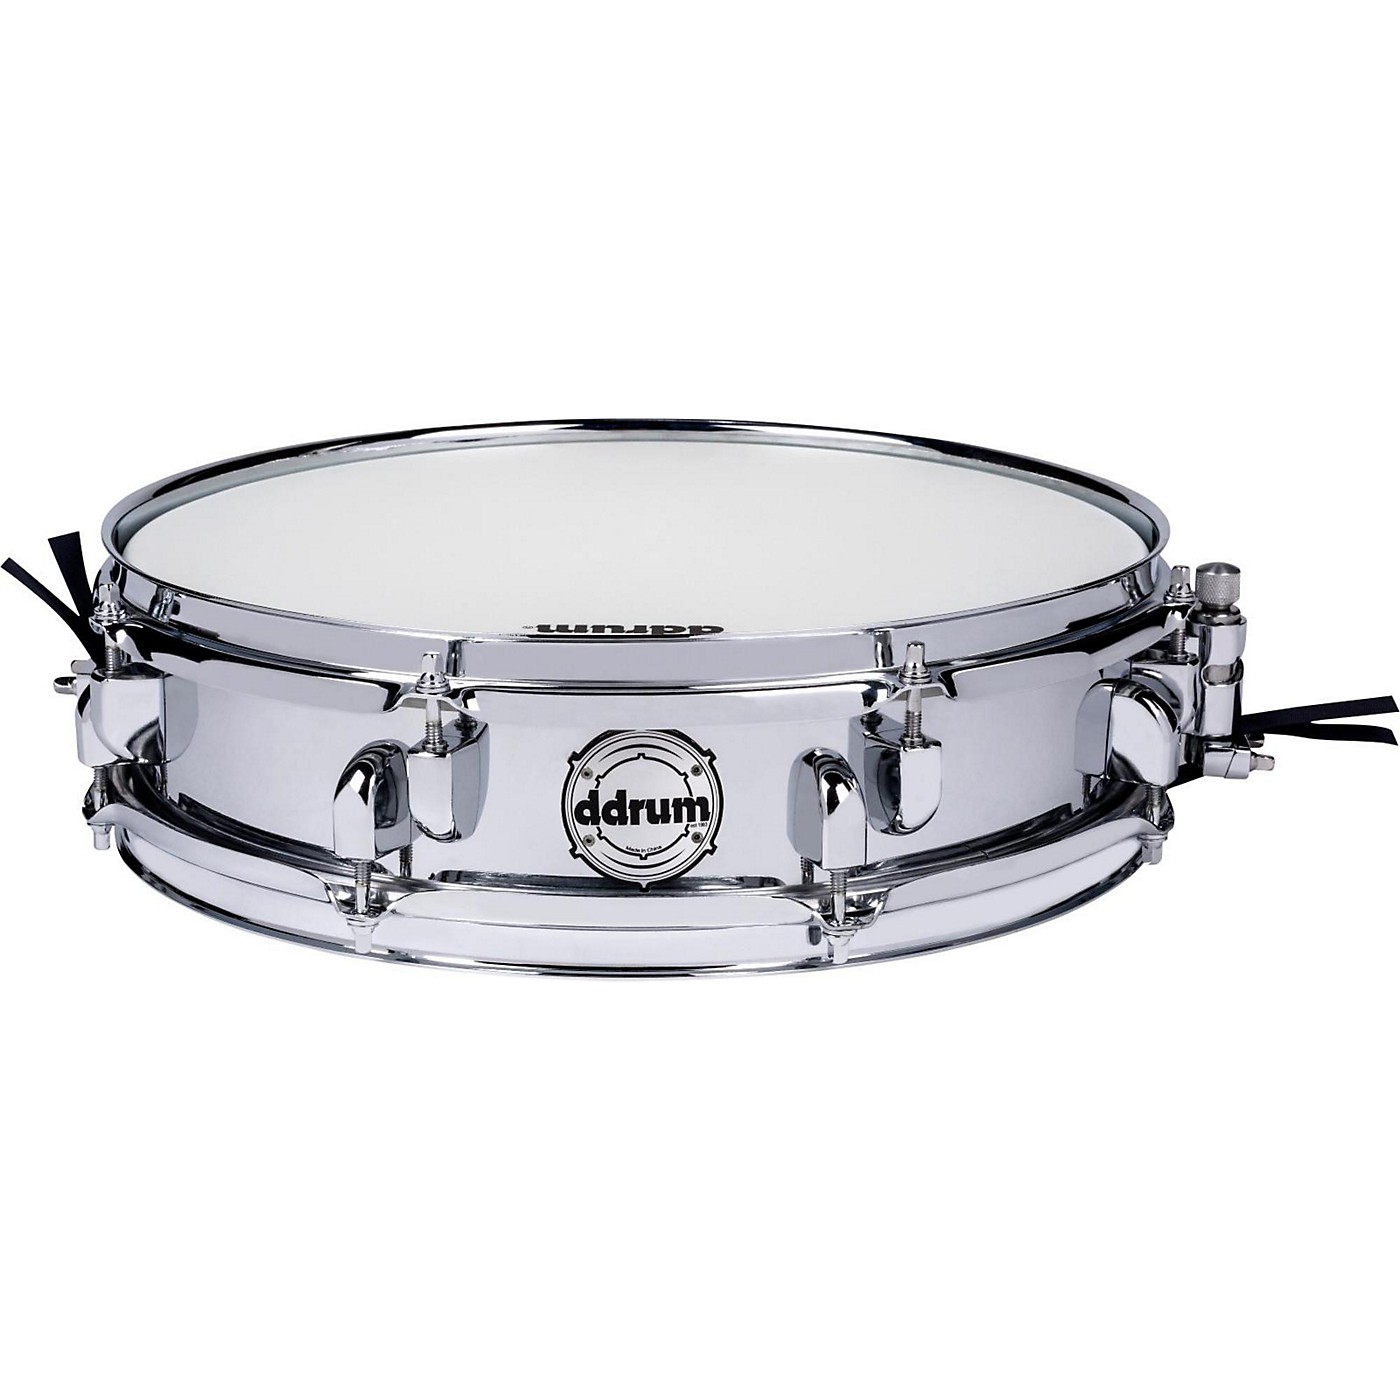 ddrum Modern Tone Steel Piccolo Snare Drum thumbnail